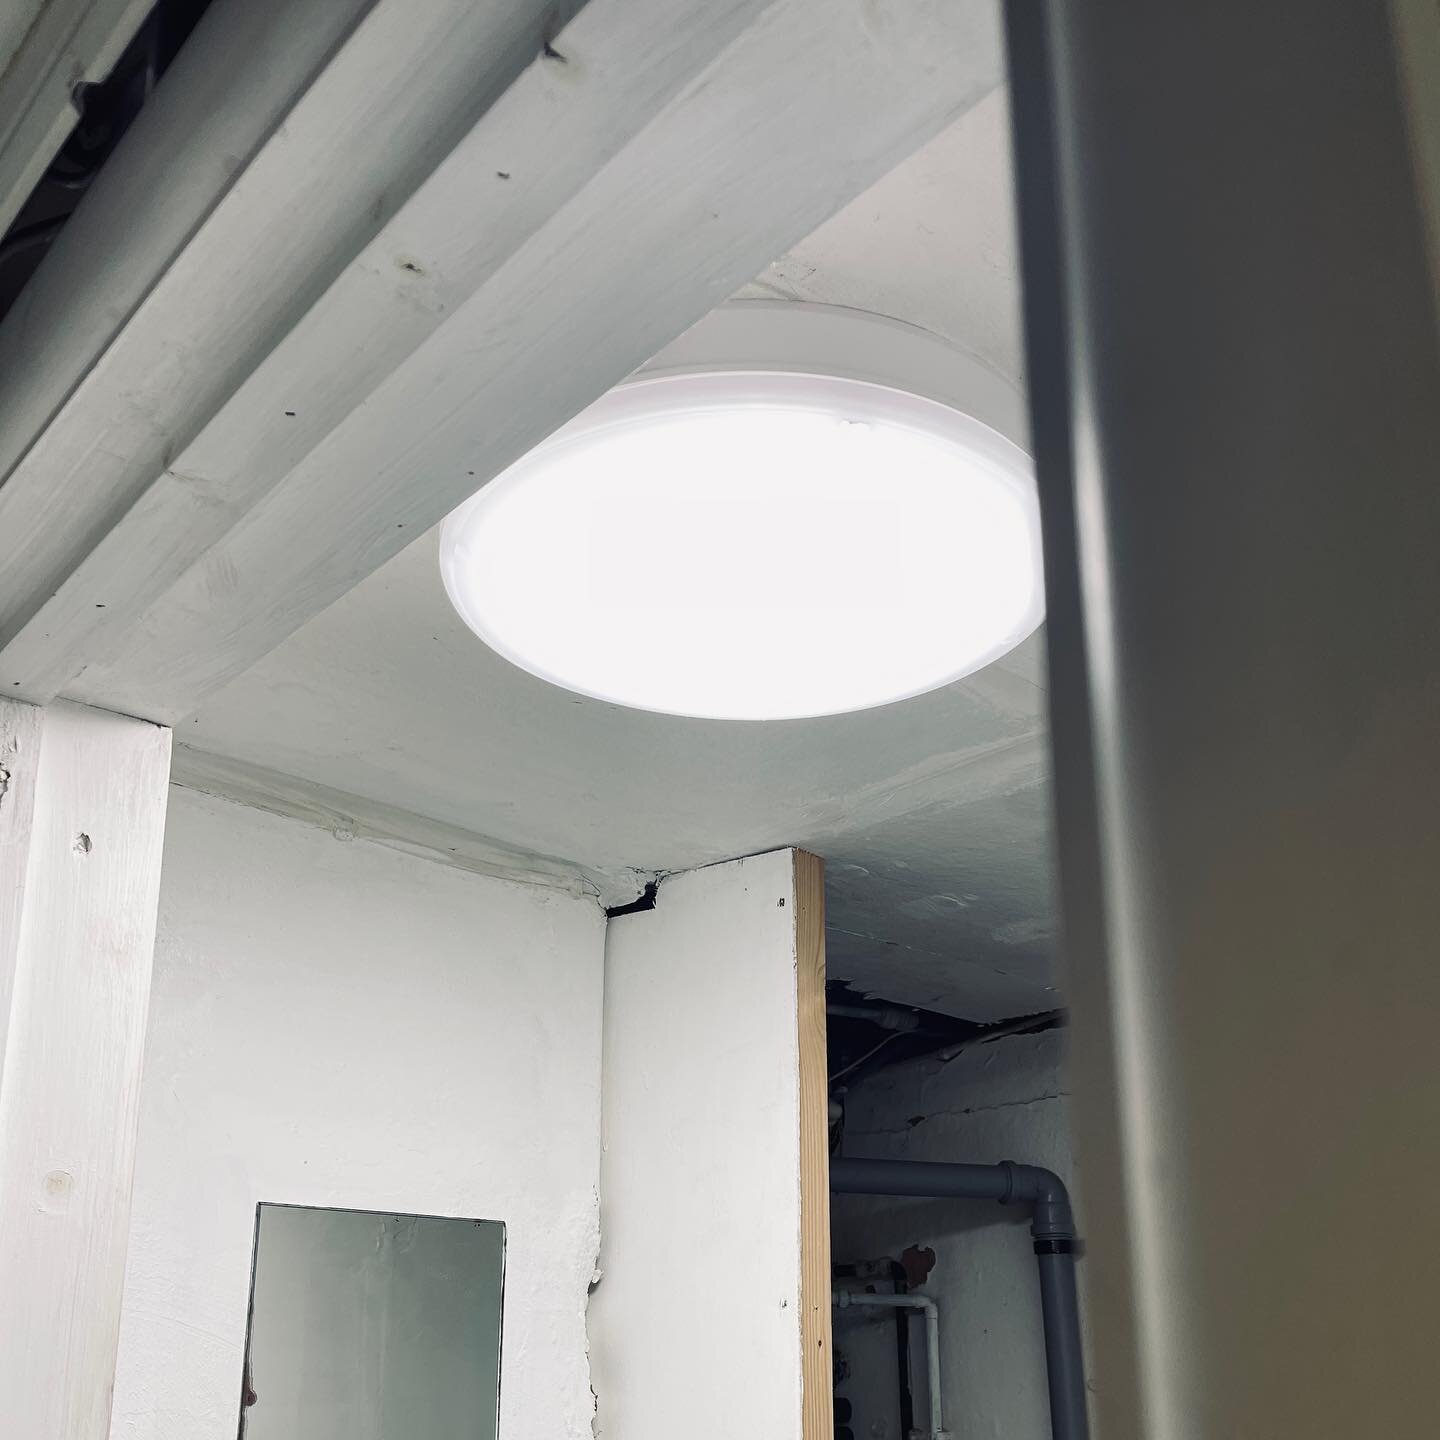 From burnt damaged cables and lights to a new @ksr_lighting_ltd LED bulkhead which offers colour and power output change!!
Awesome!
Due to the fact that cables were super tight we used a nice stuffing gland and over sleeved the cables due to the crac